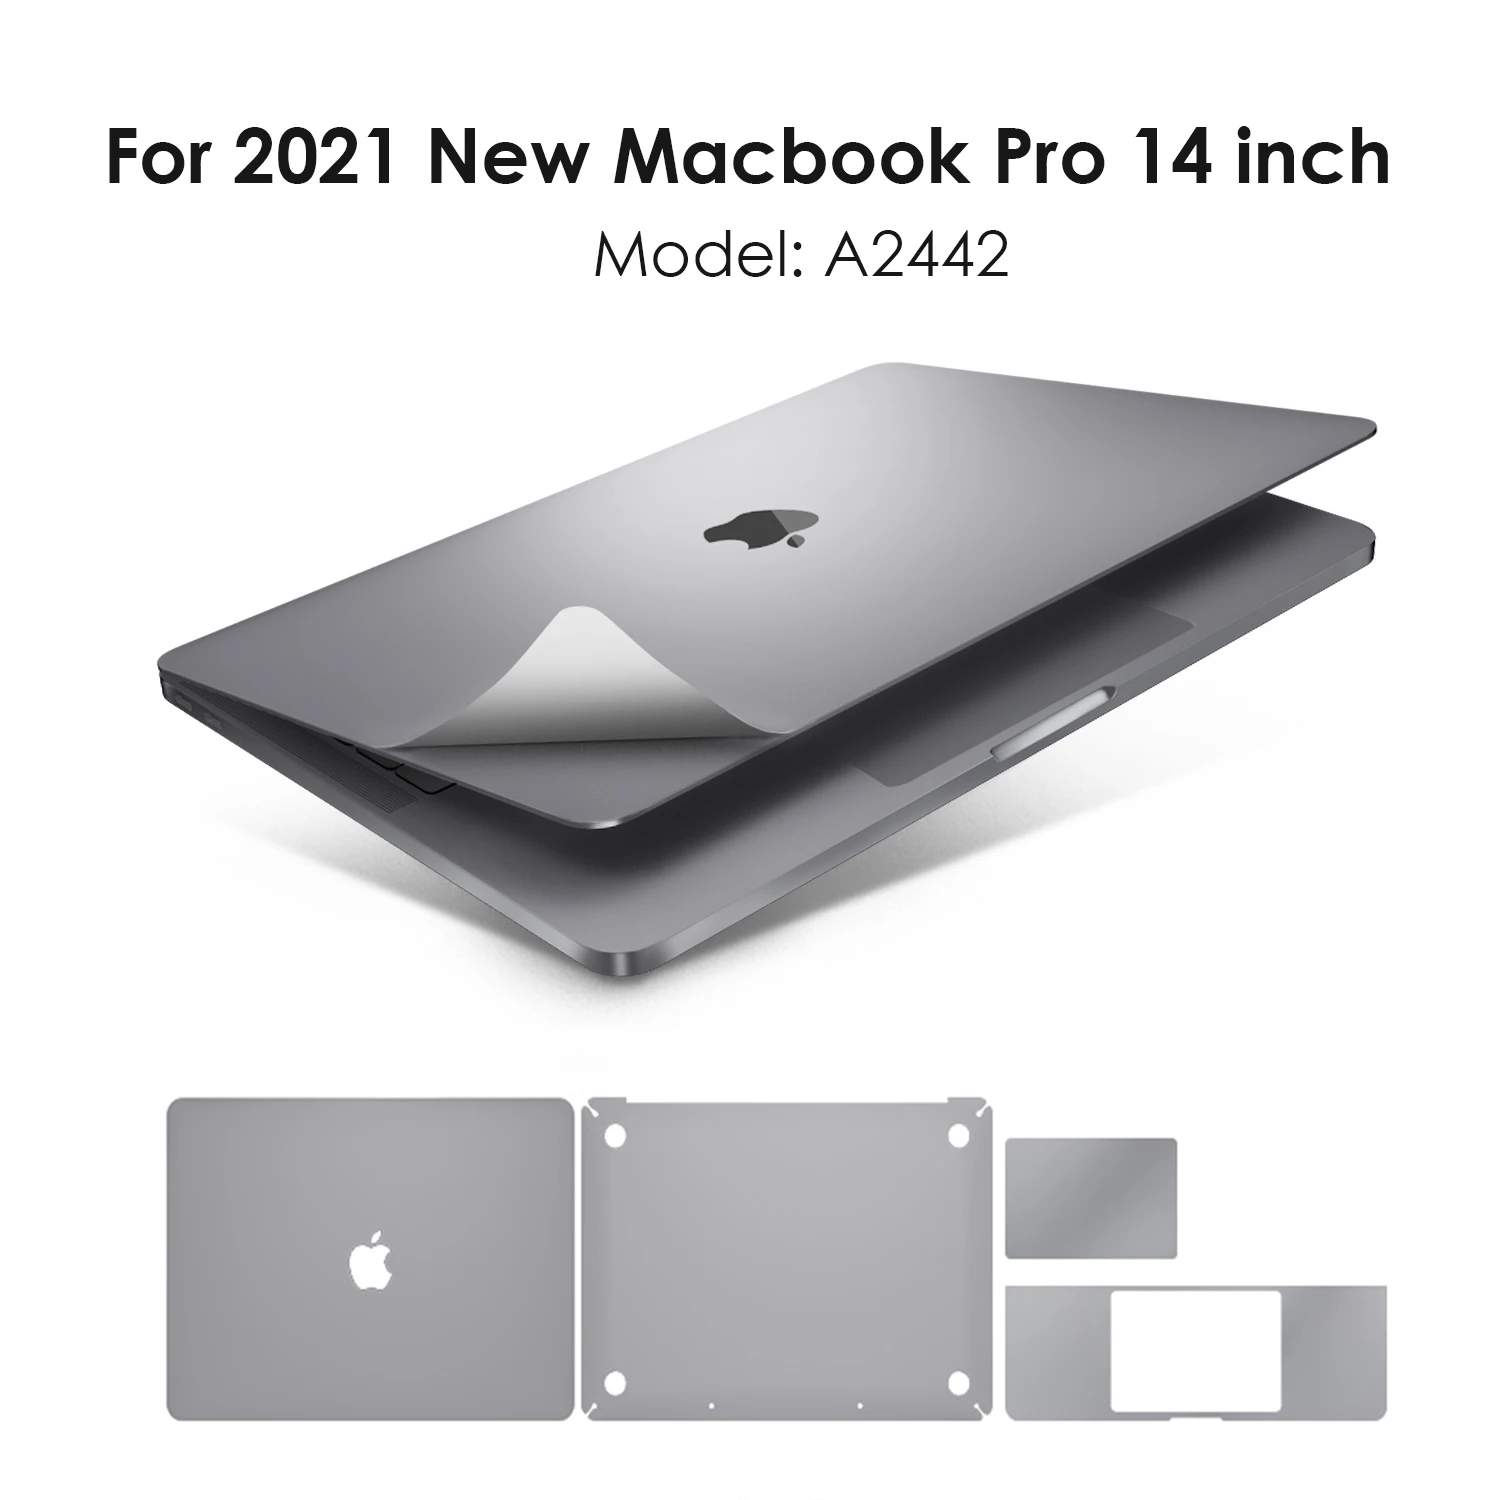 

Full Body Sticker for 2021 New MacBook Pro14 model A2442, Include Top + Bottom + Touchpad + Palm Rest Skin Full-Cover Protective